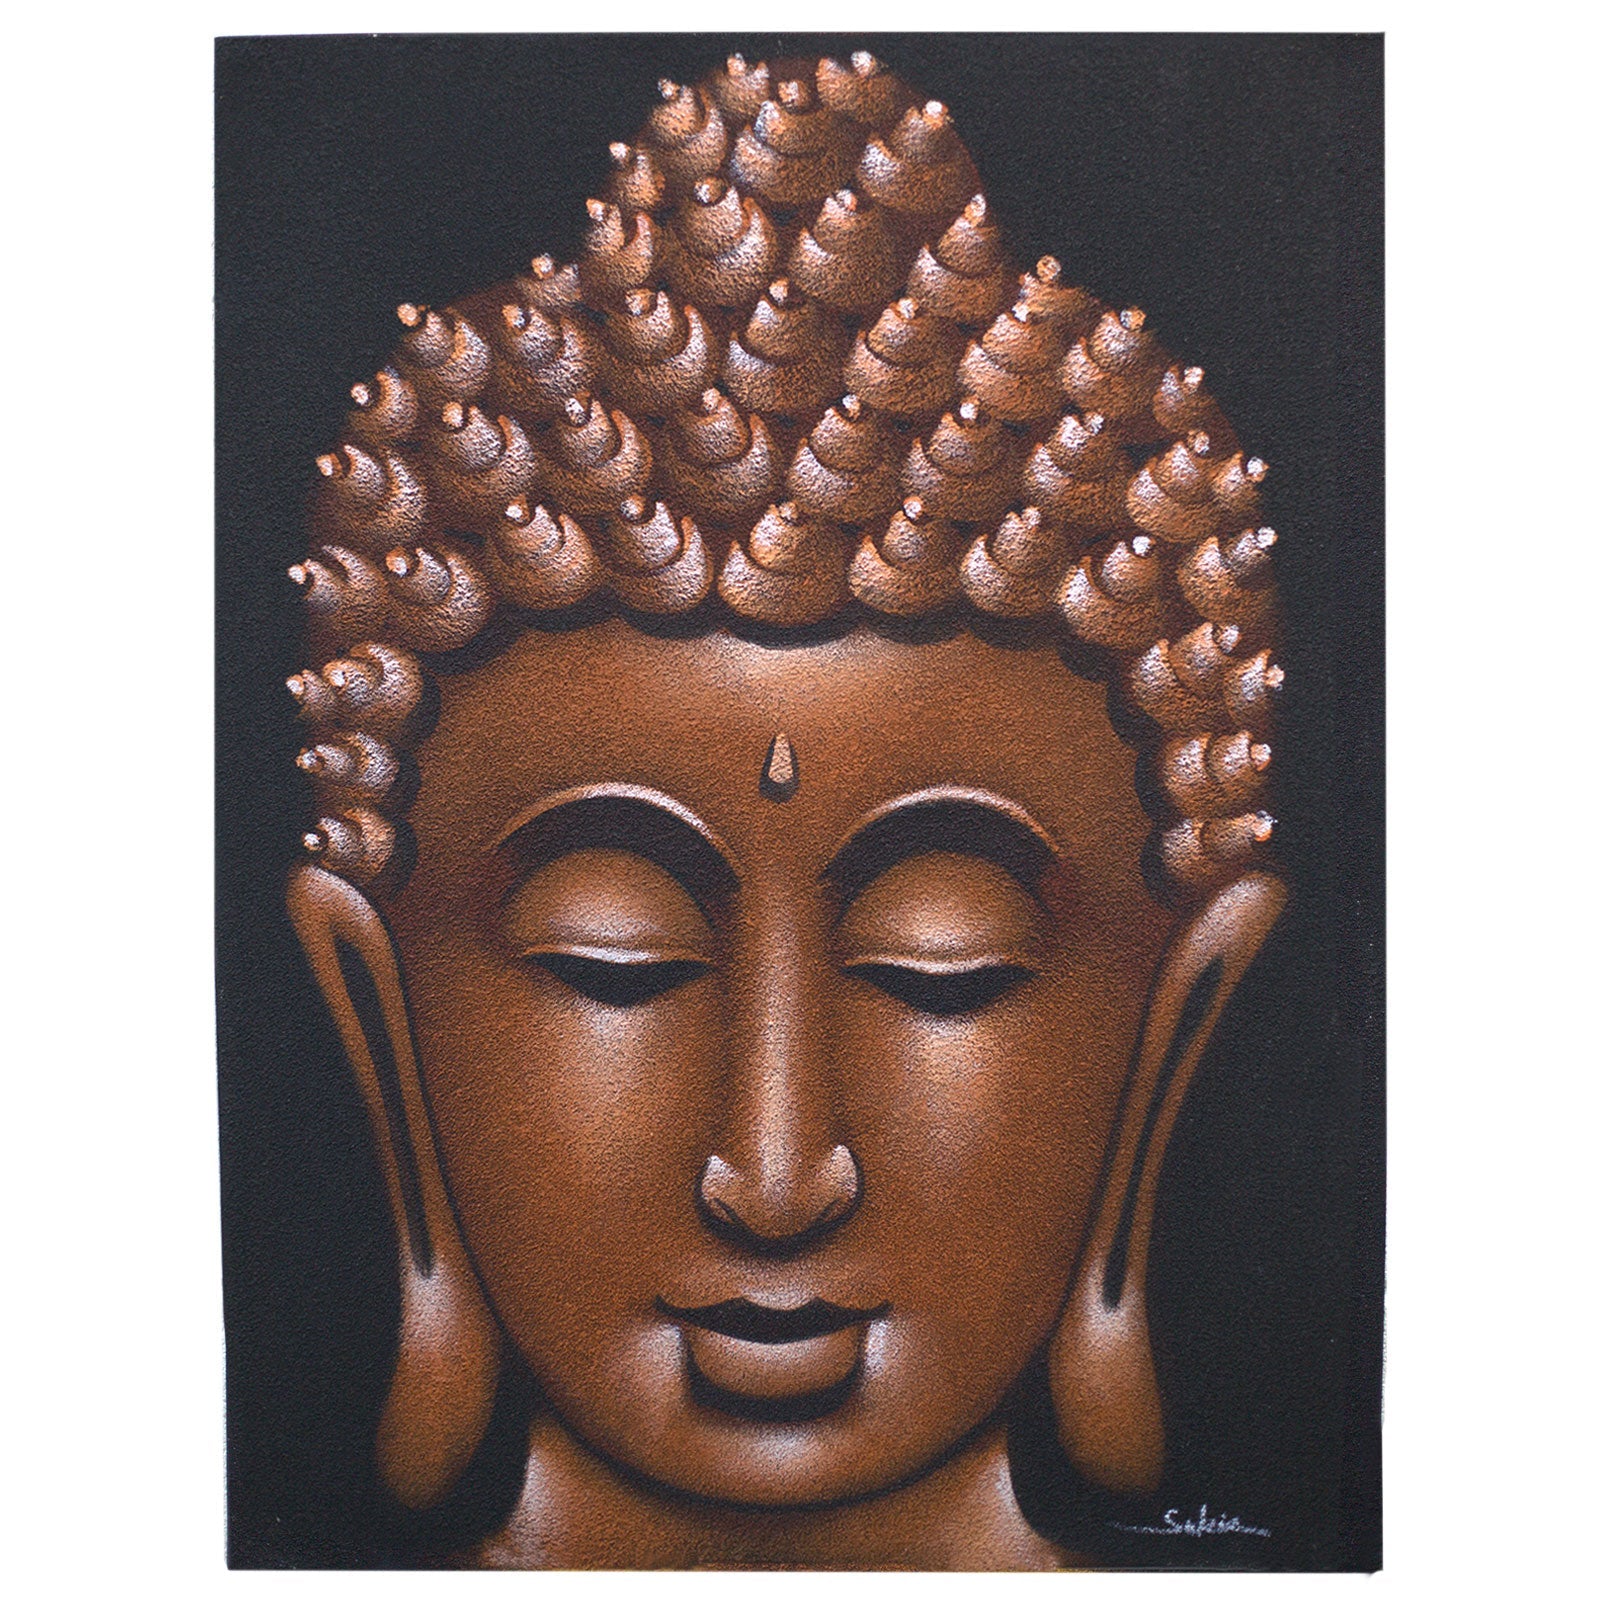 View Buddha Painting Copper Sand Finish information